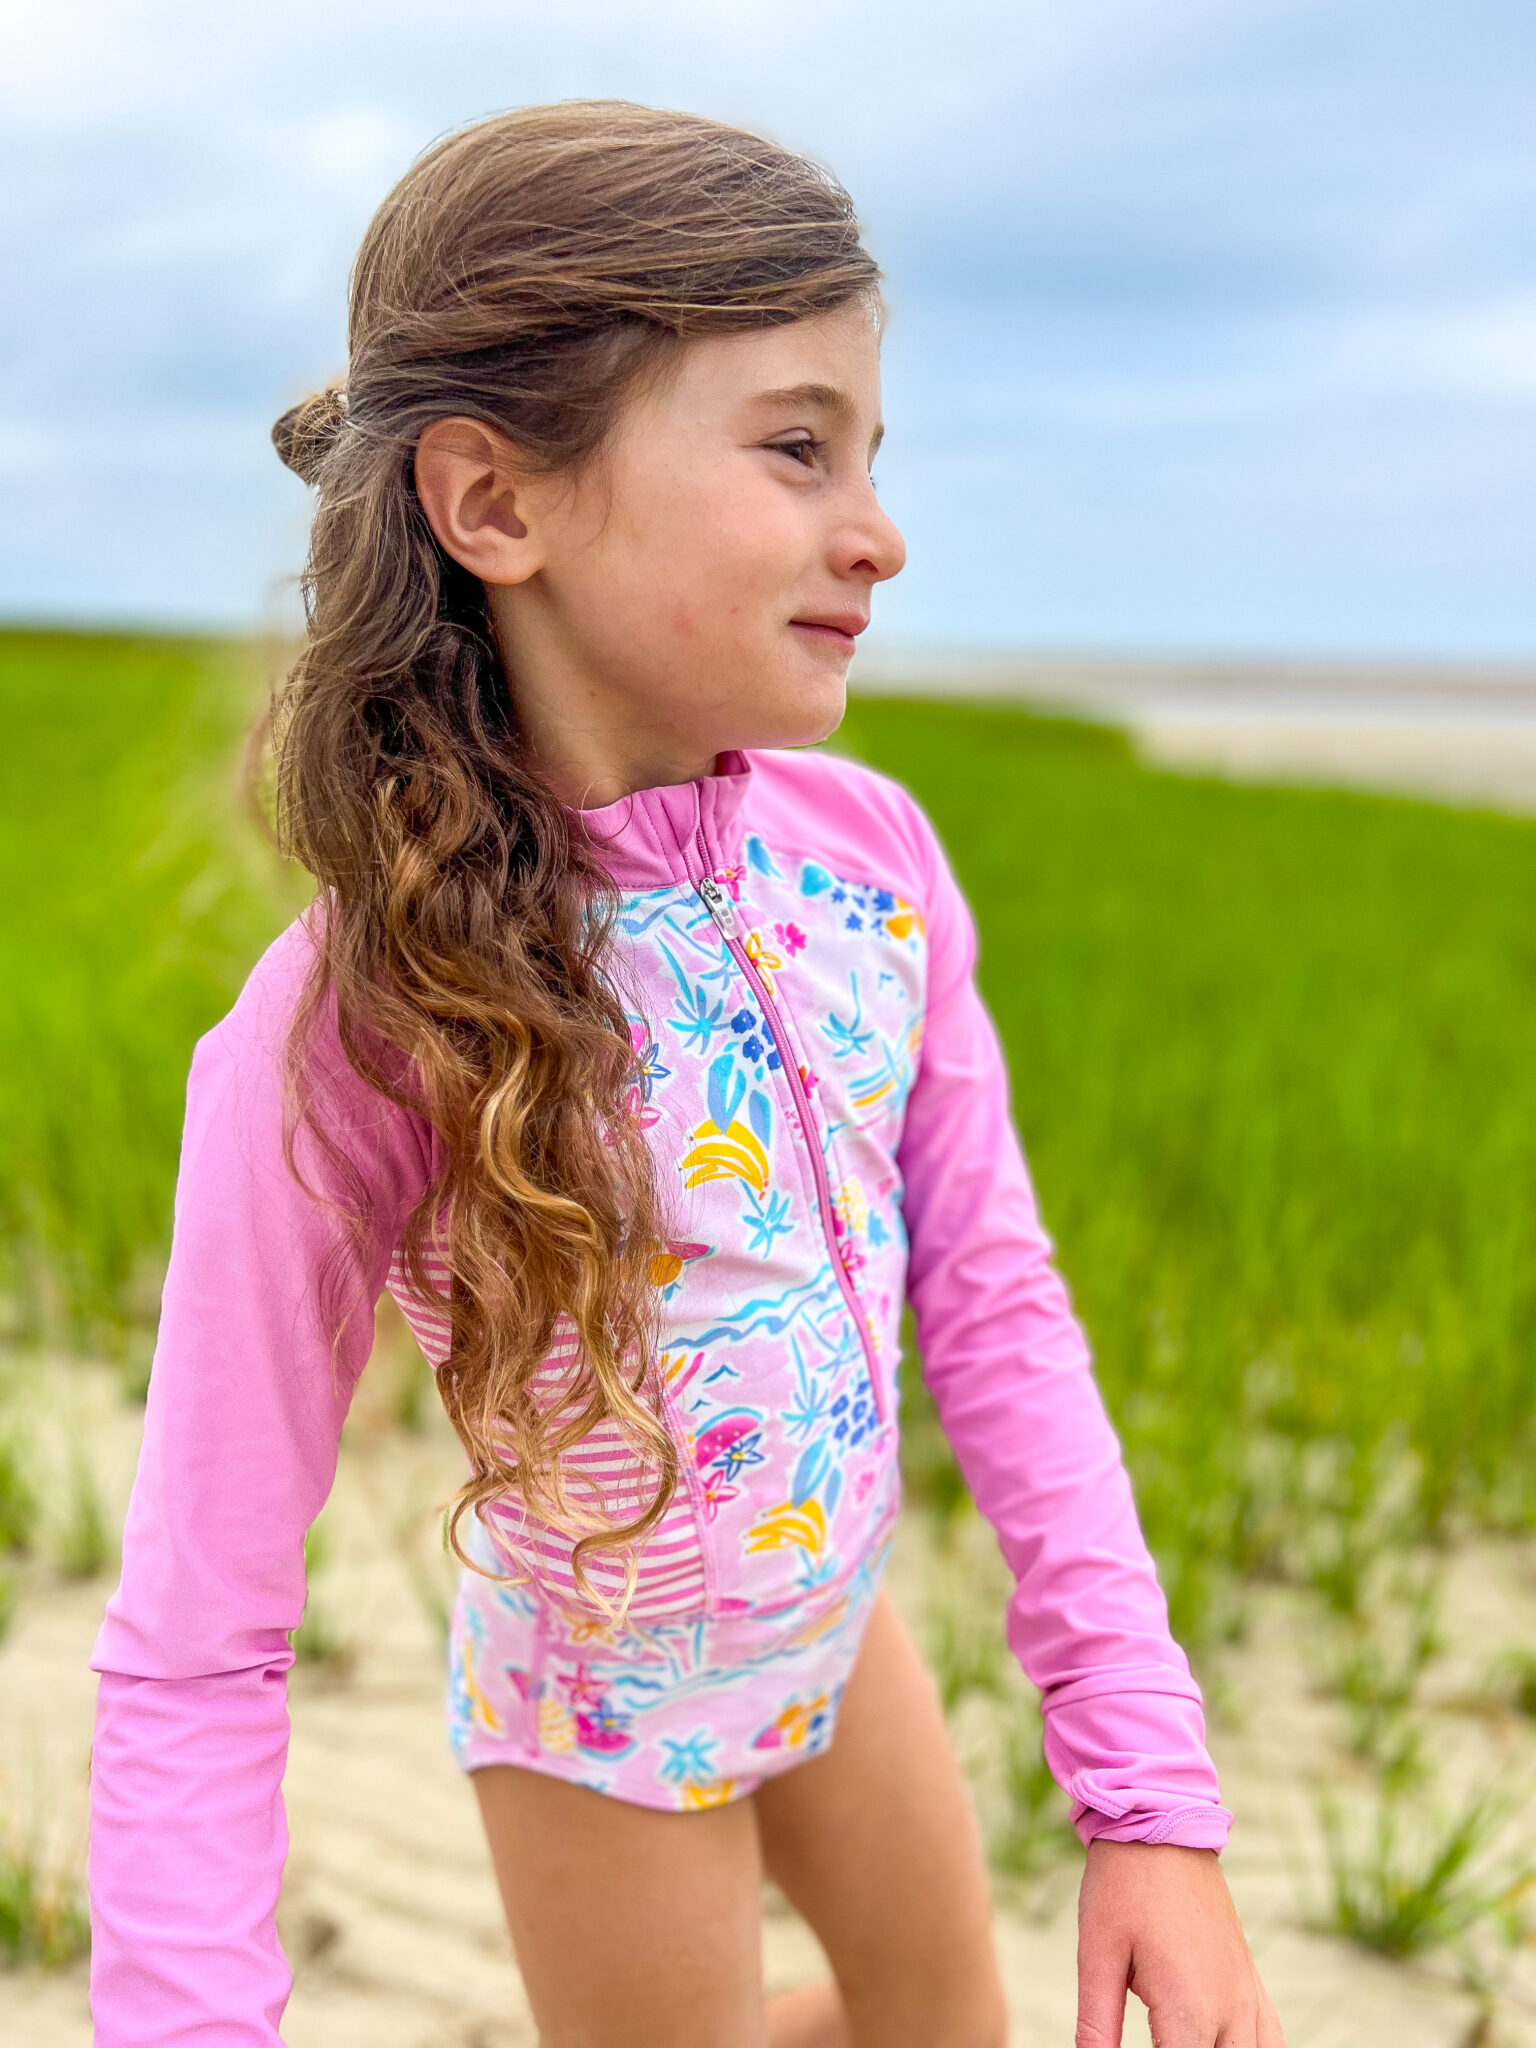 7 year old girl pink bathing suit standing on beach sea grass behind her 